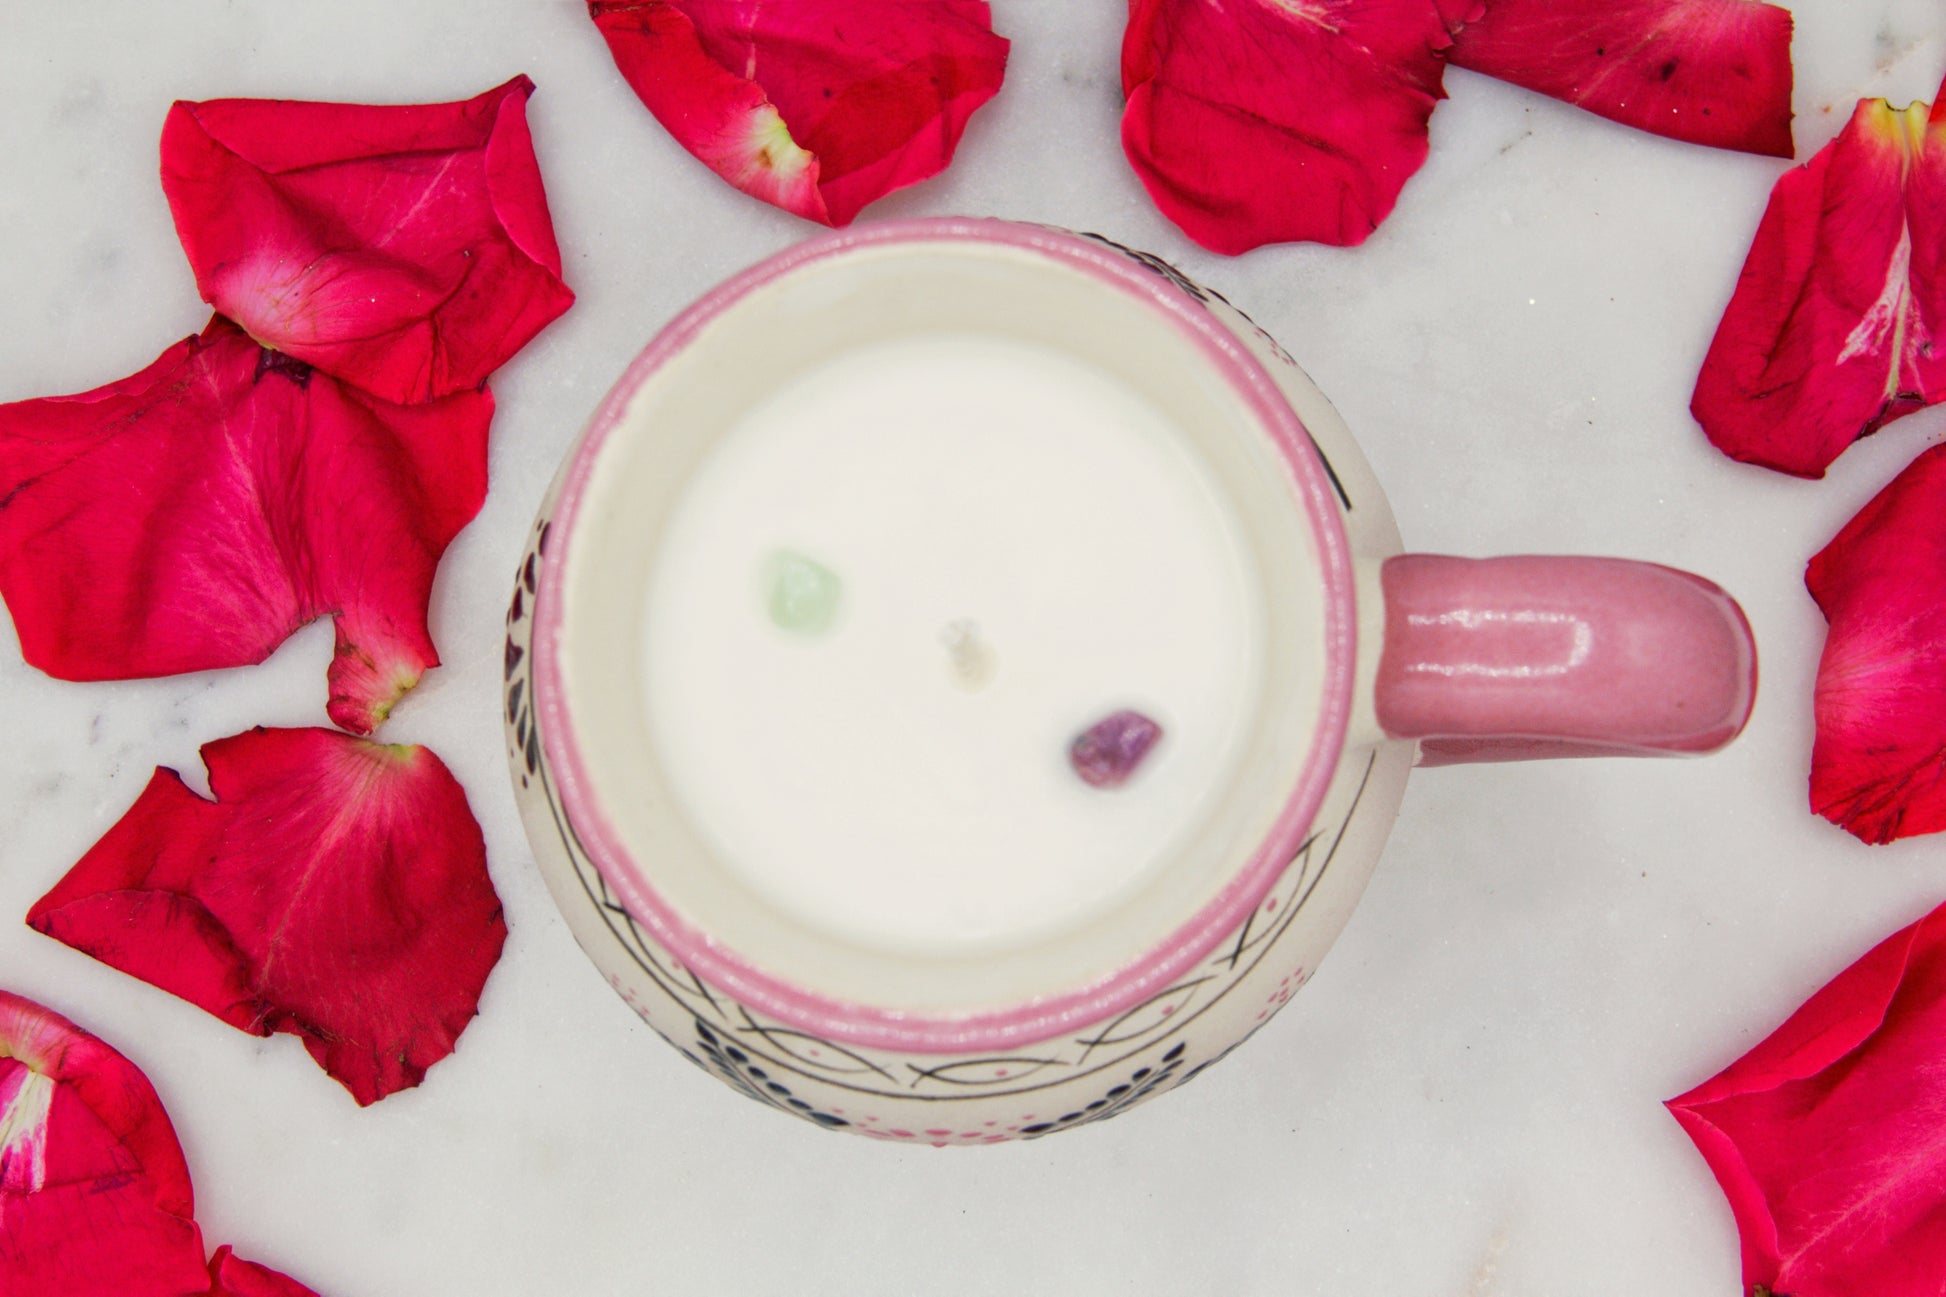 top view of a handmade artisanal candle in a pink floral design mug with a handle. Custom made by Artisan in Mexico. 100% All Natural Soy Candle. Reuse the talavera as home decor or storage